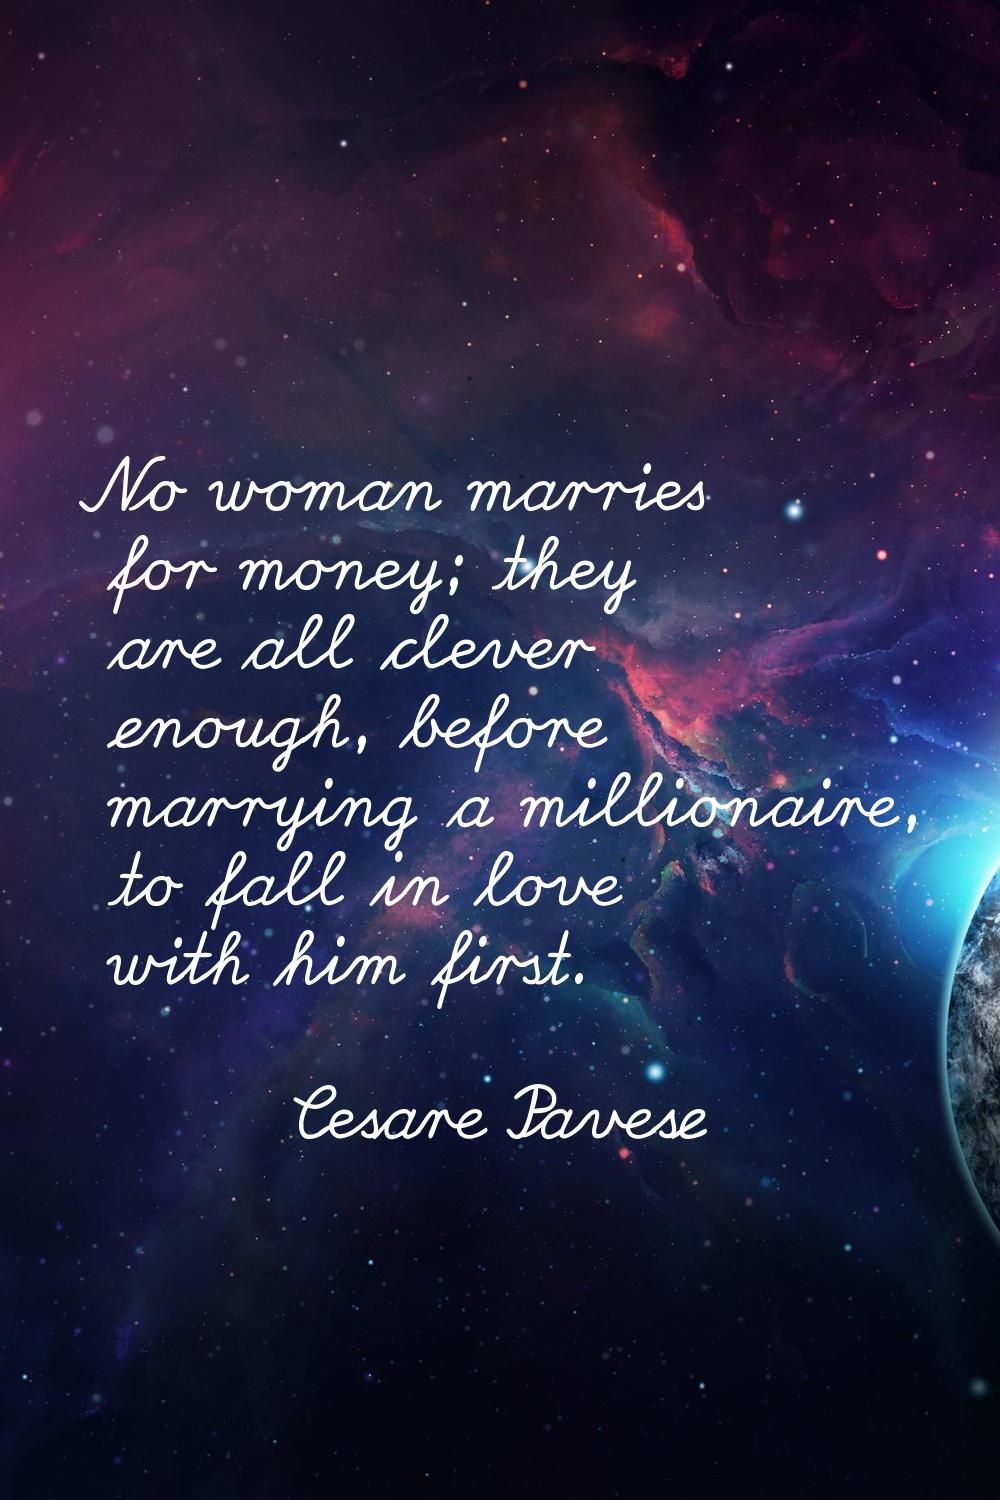 No woman marries for money; they are all clever enough, before marrying a millionaire, to fall in l